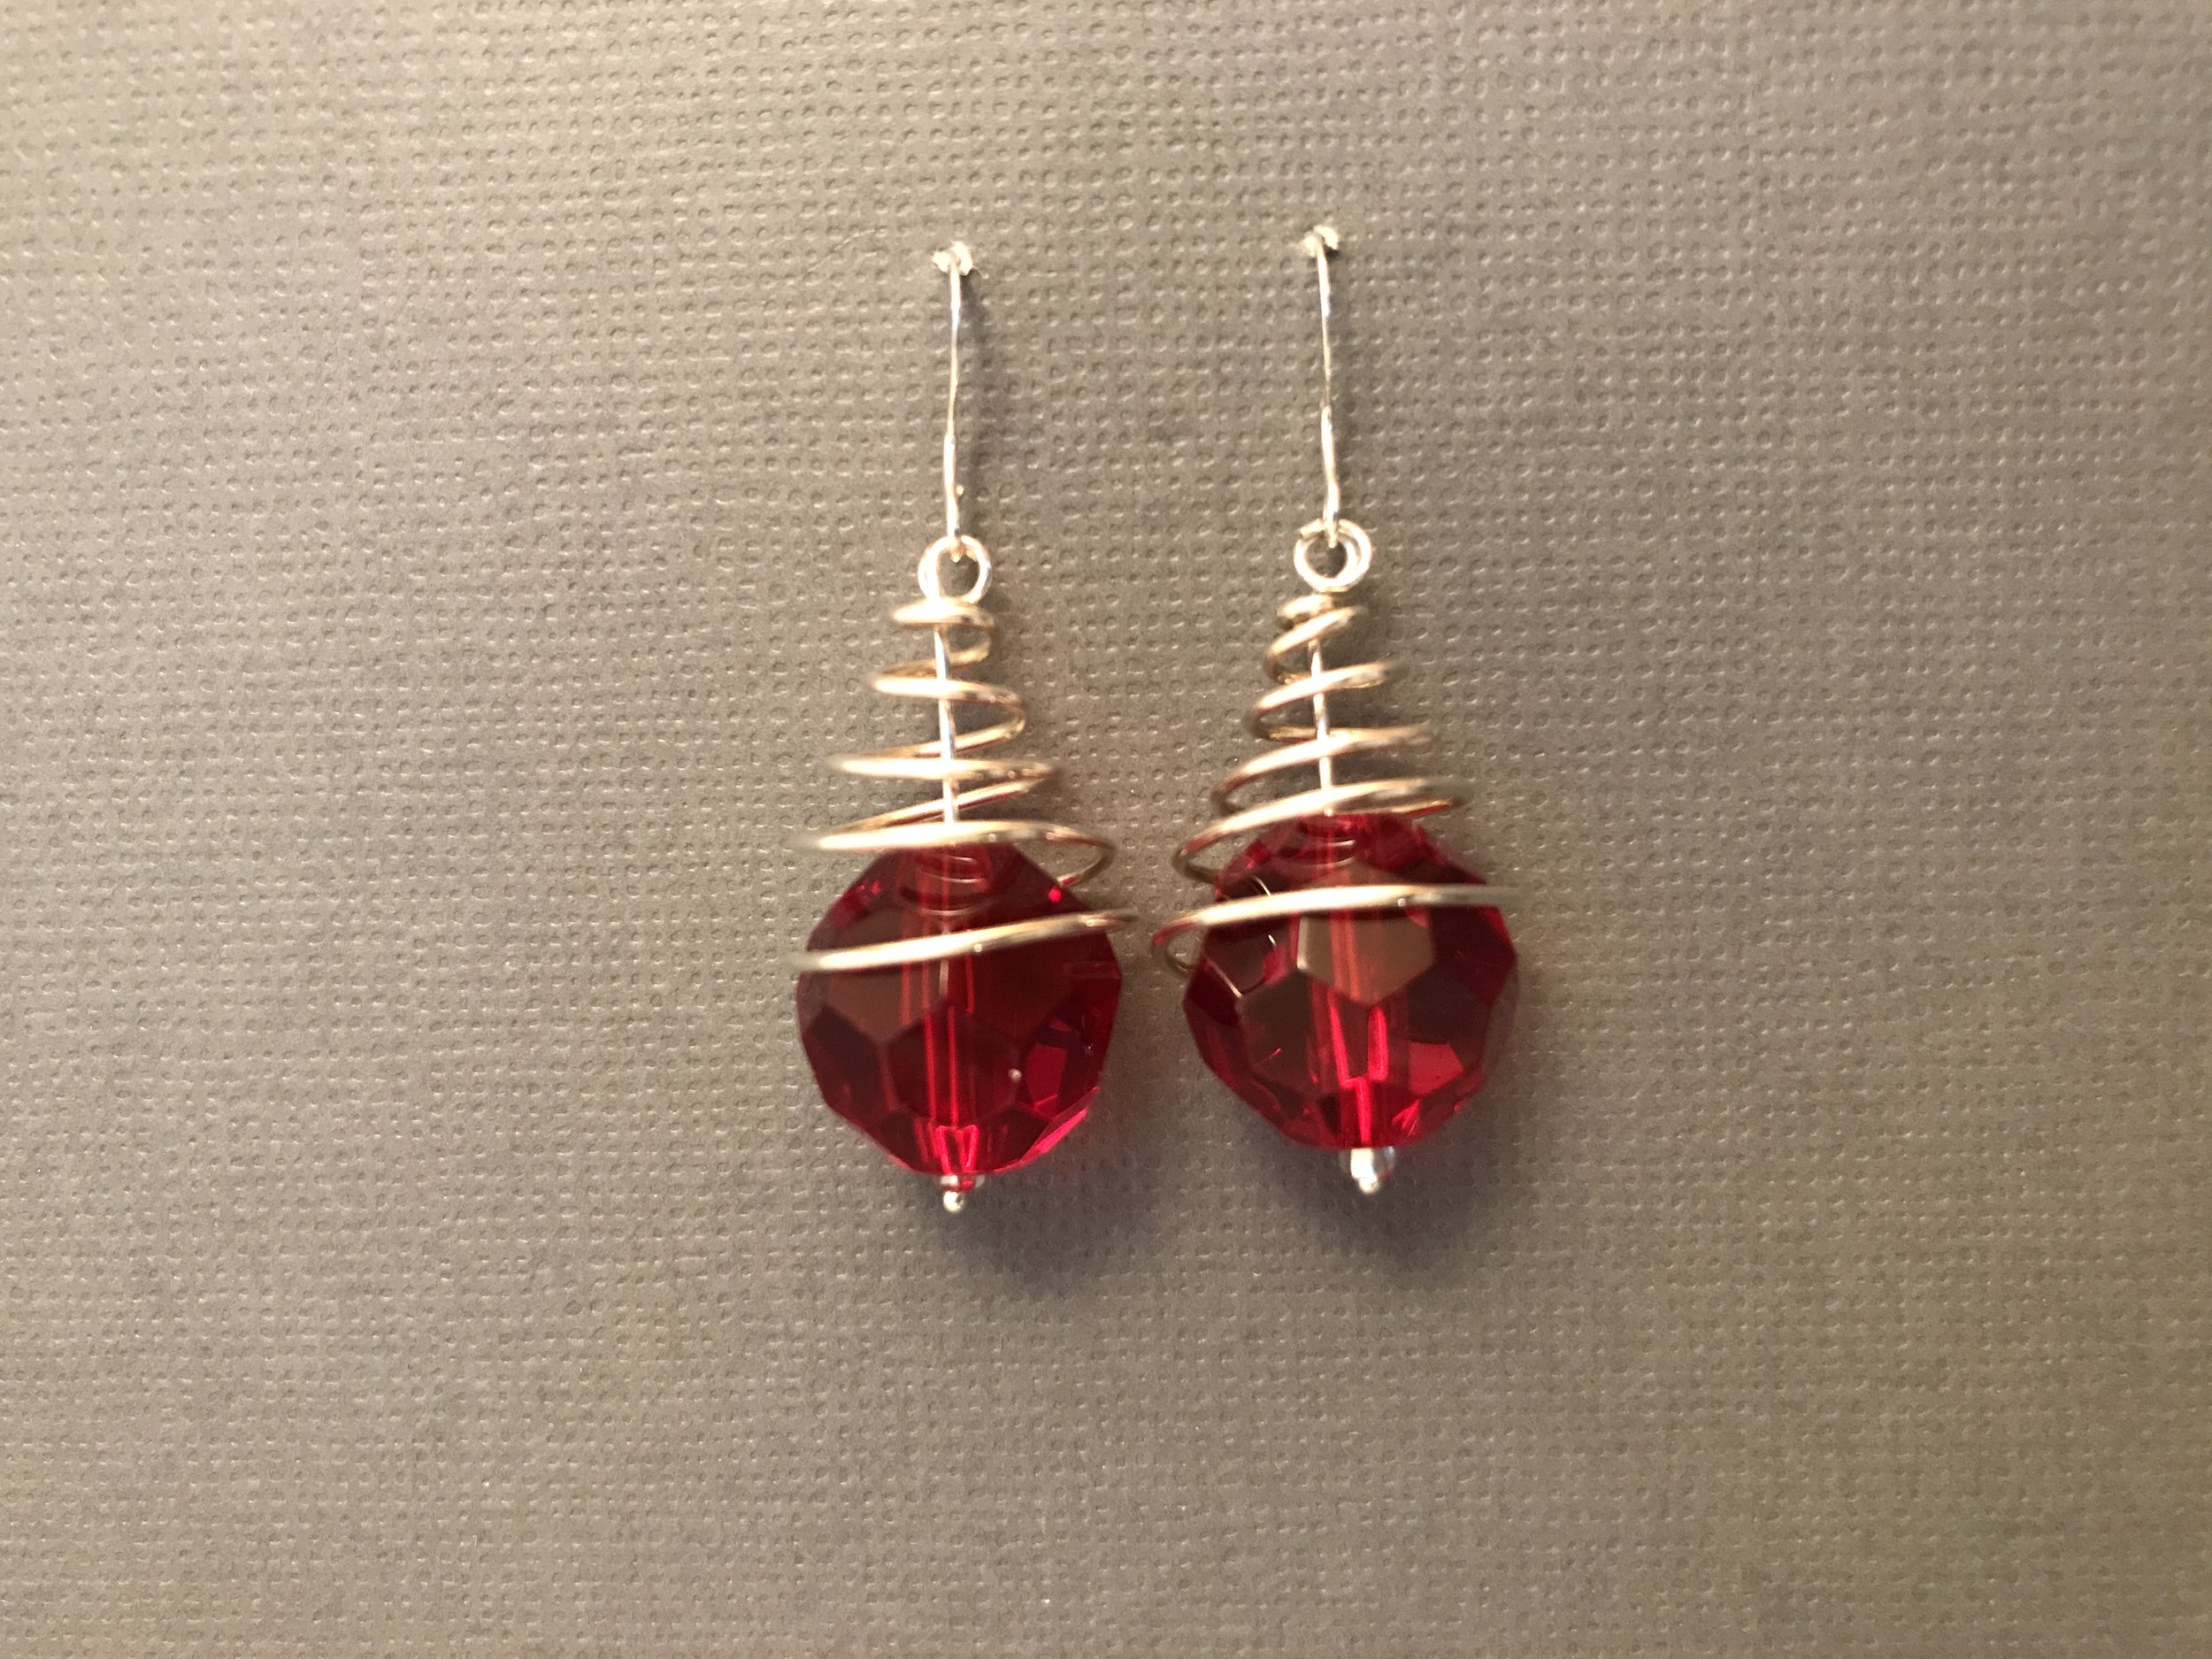 Copy of Red Christmas Tree Earrings (Copy)